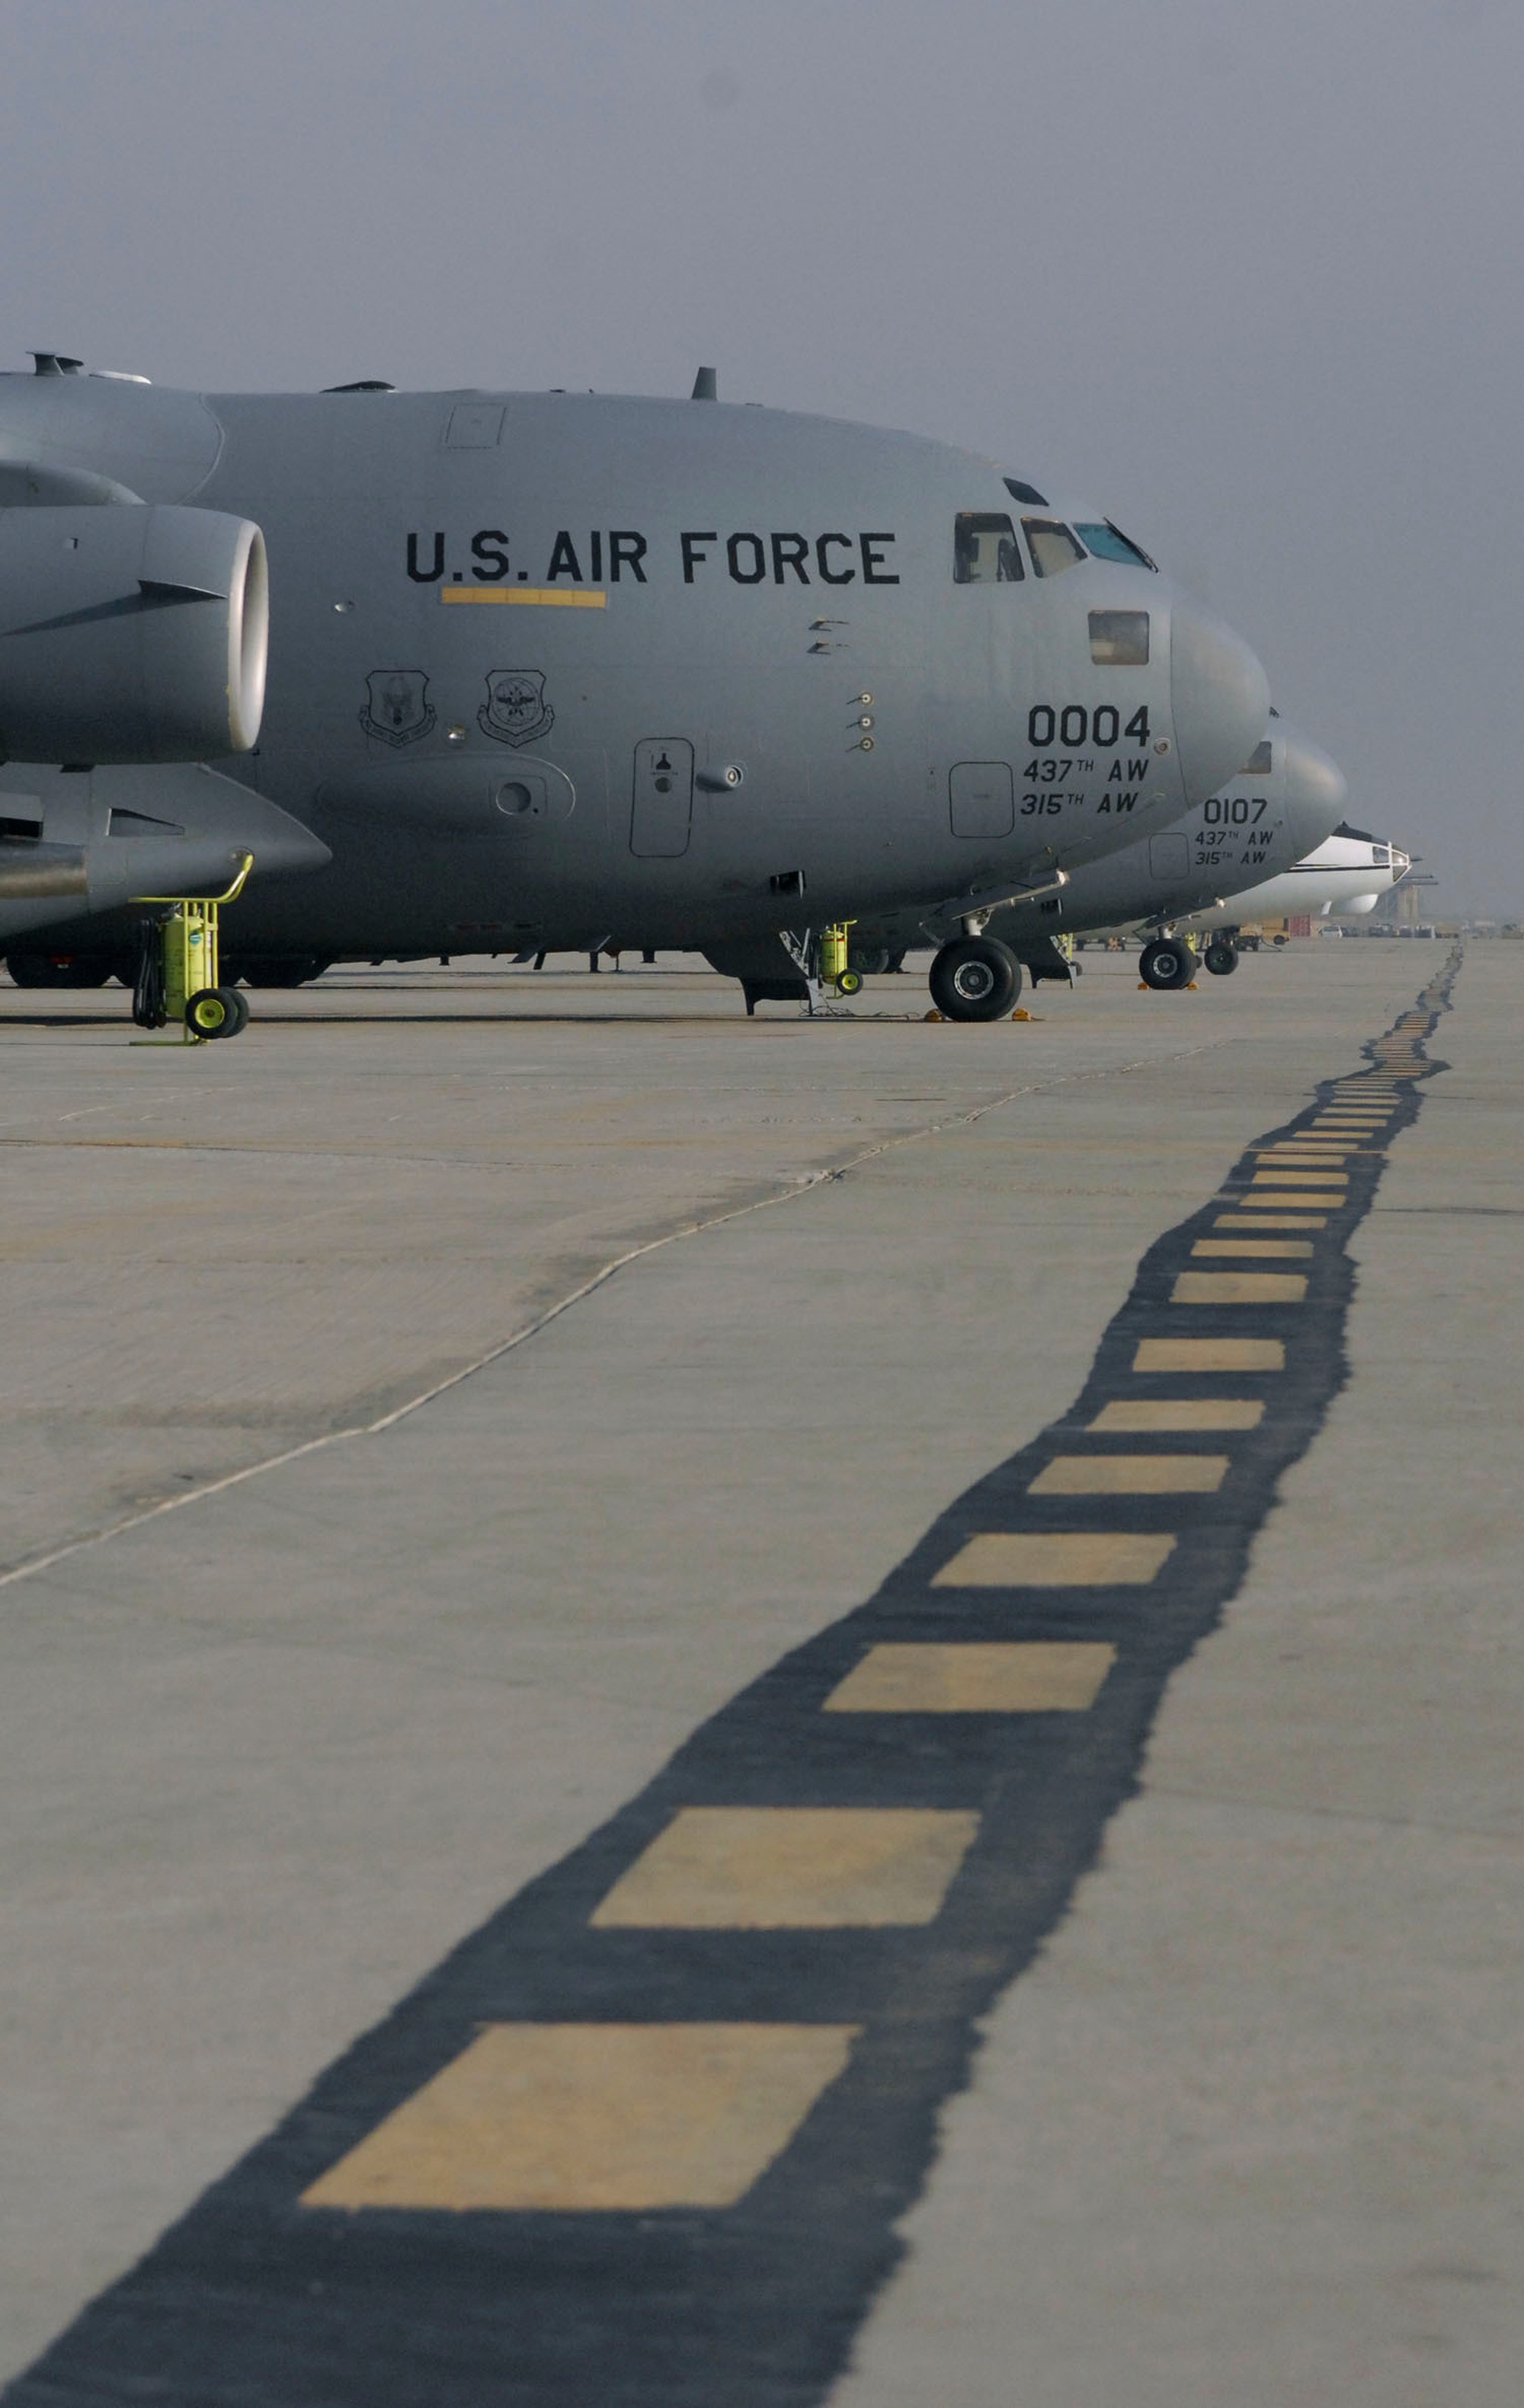 DVIDS - Images - C-17's in Afghanistan [Image 5 of 10]